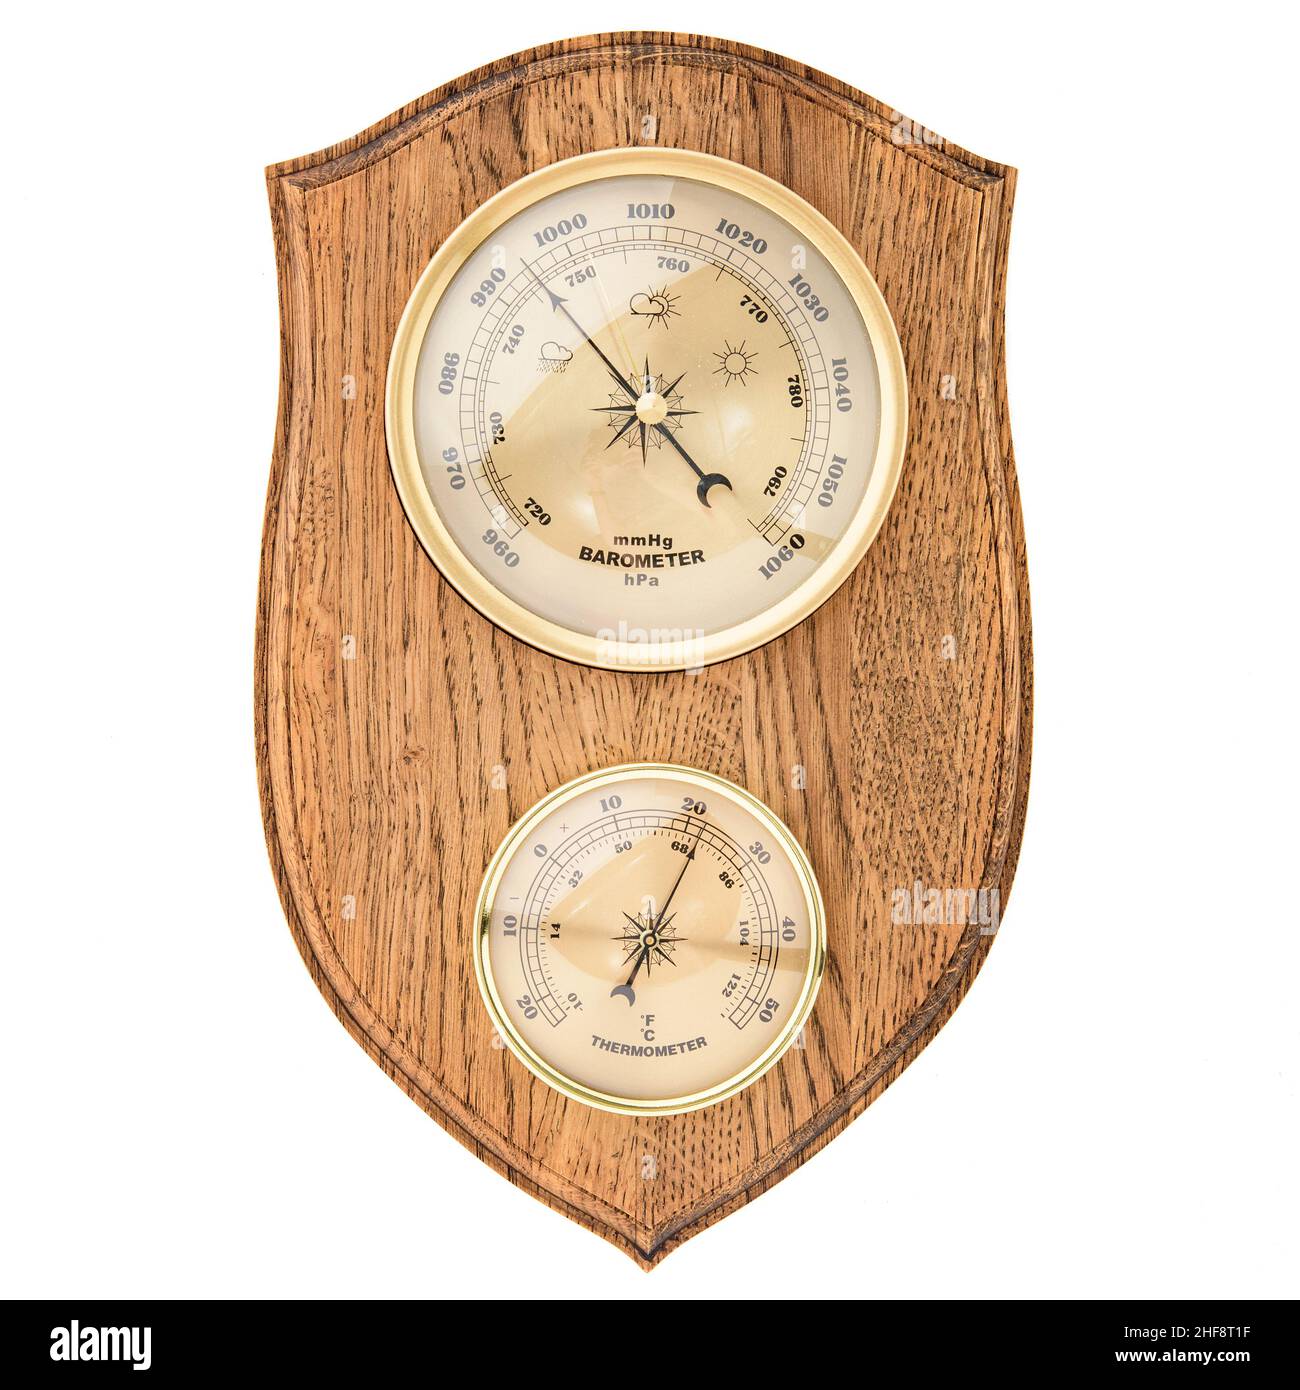 https://c8.alamy.com/comp/2HF8T1F/vintage-wooden-clock-with-barometer-and-old-marine-style-thermometer-on-a-white-background-wall-decor-for-the-interior-2HF8T1F.jpg